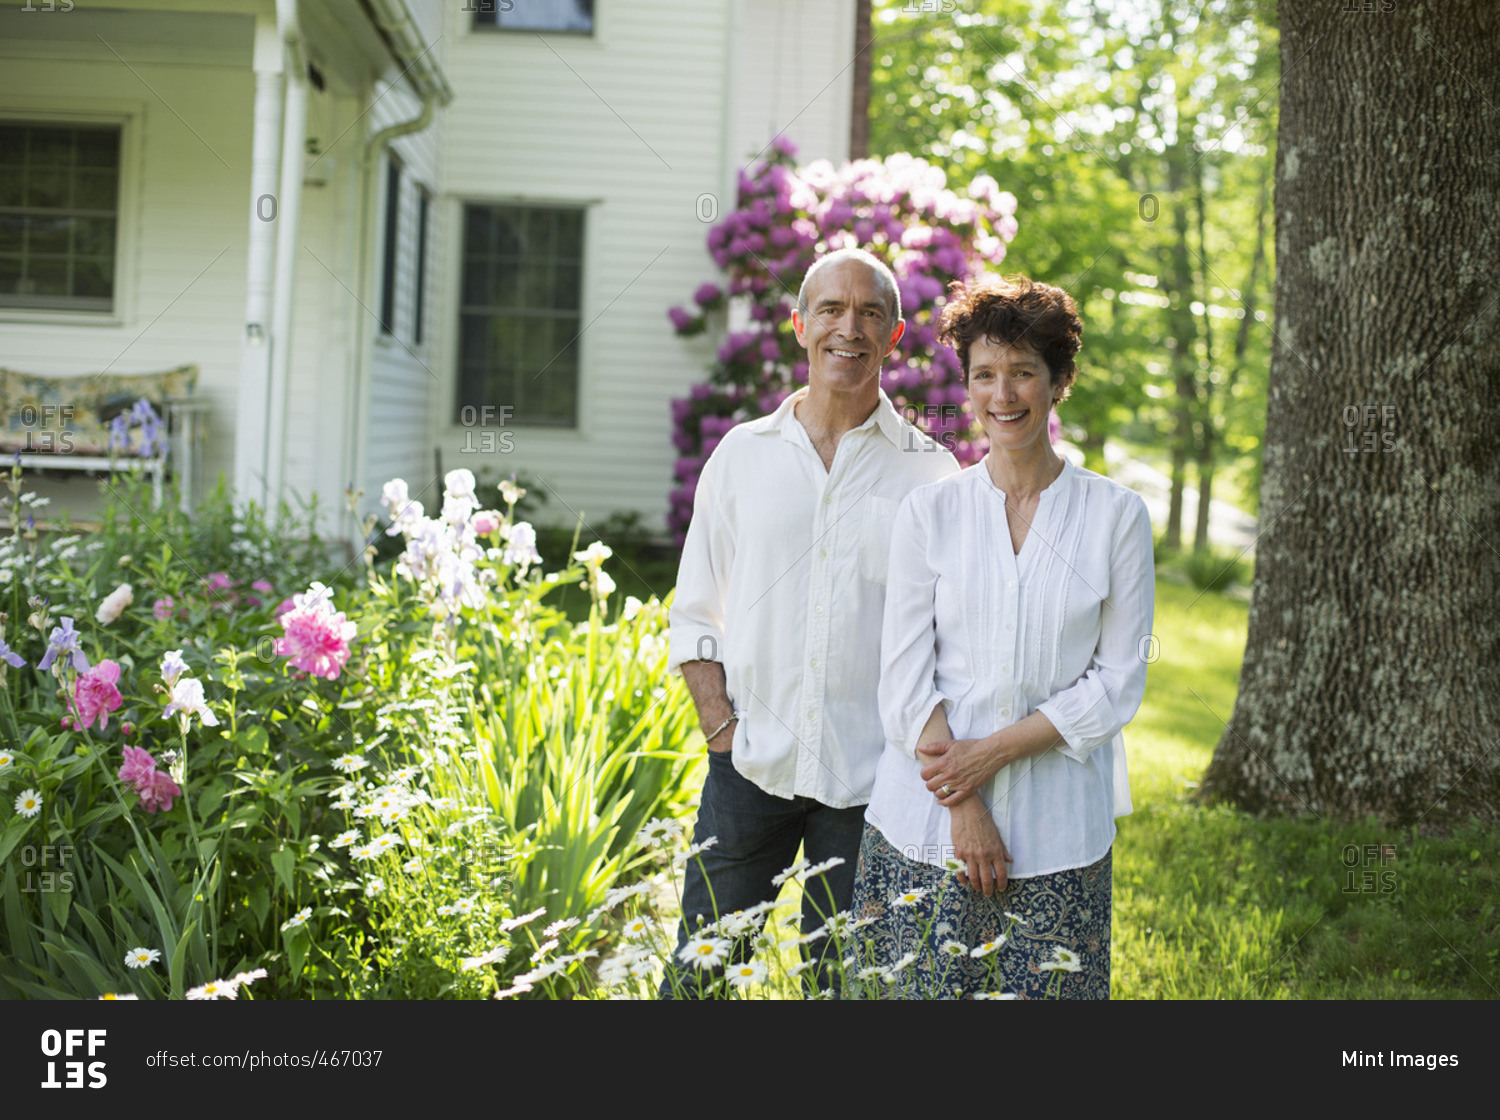 A mature couple in white shirts standing together among flowers